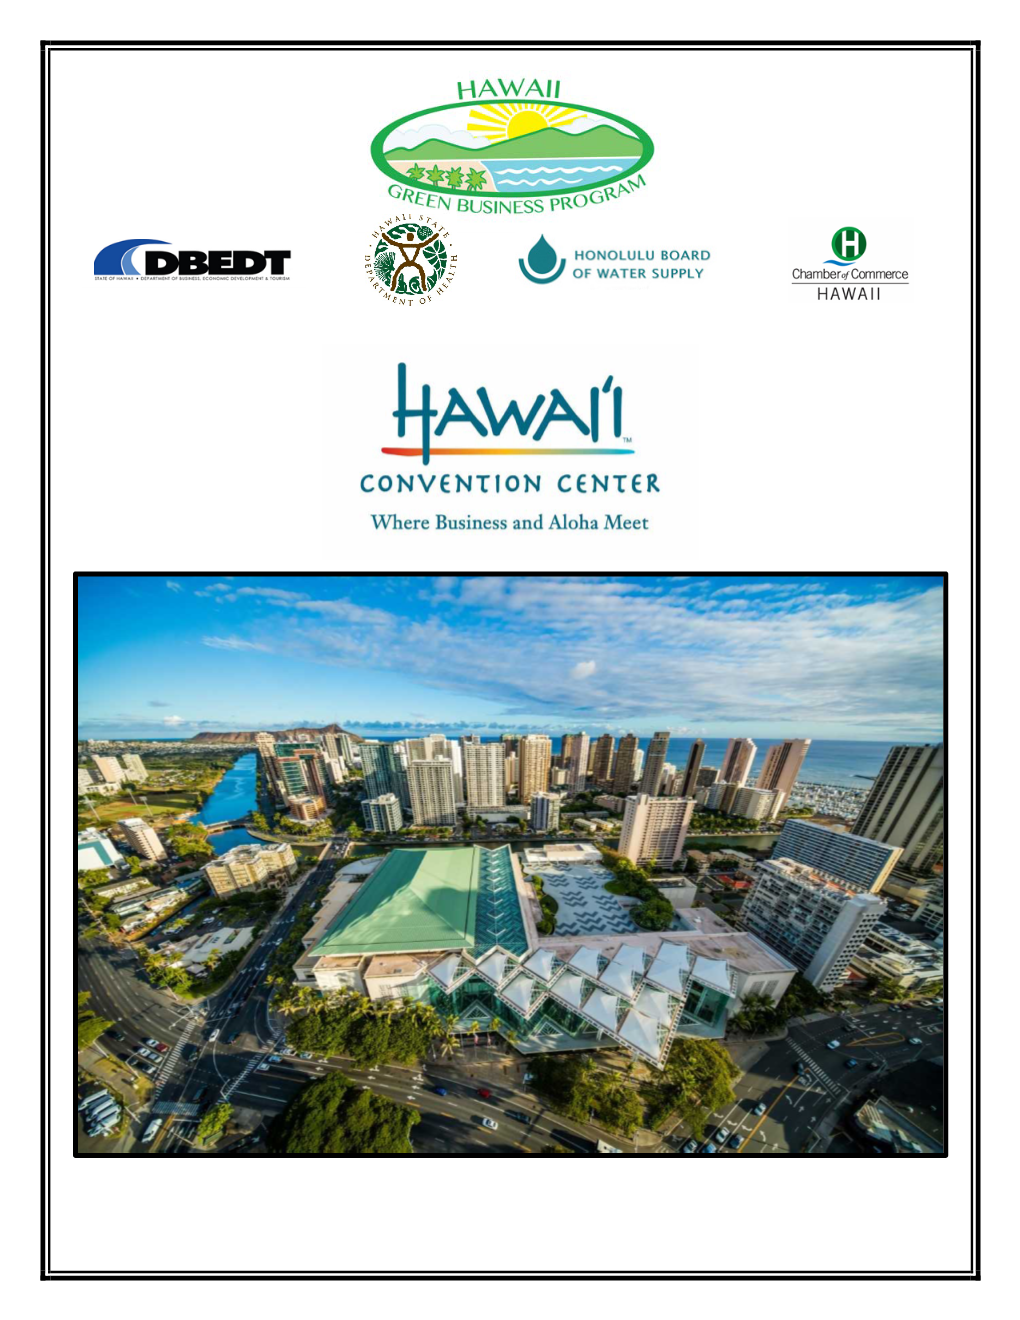 Hawaii Convention Center (HCC) Has Integrated Sustainability, Conservation and Respect for the Environment in All Aspects of Its Planning and Operations